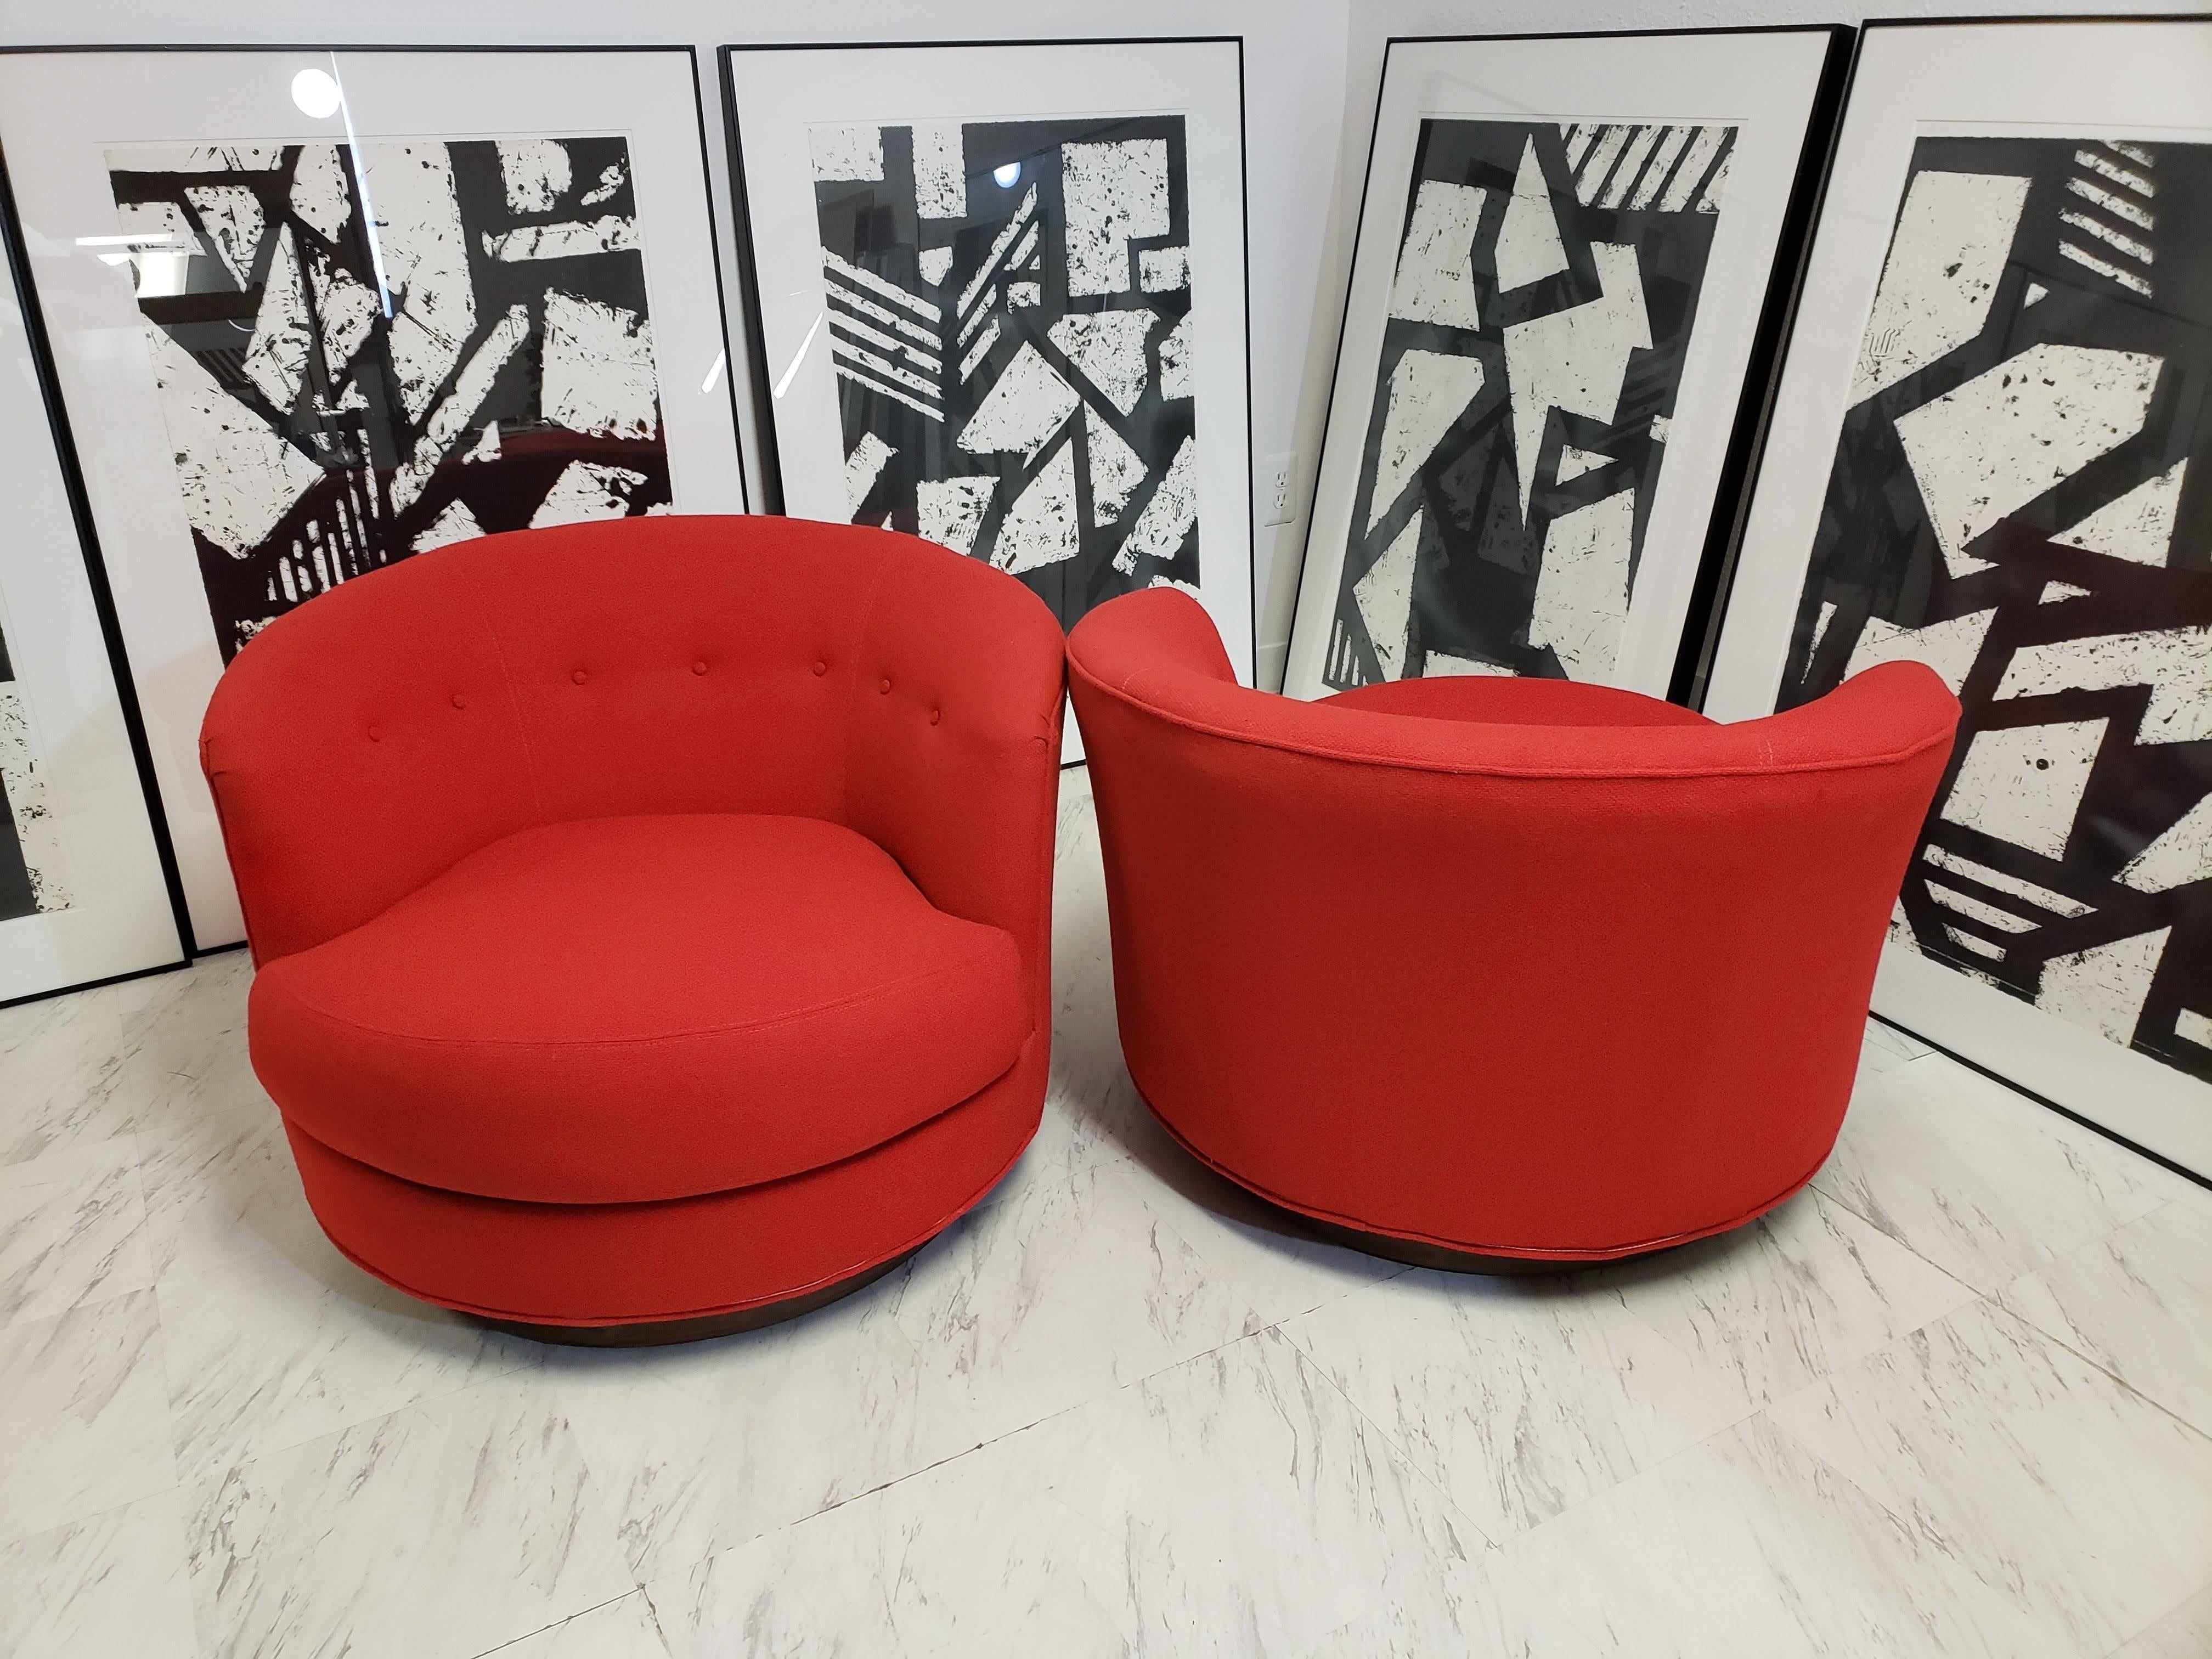 For your consideration is a pair of vibrant red swivel chairs from Baughman for Selig. These chairs are in excellent condition. Dimensions are: 32